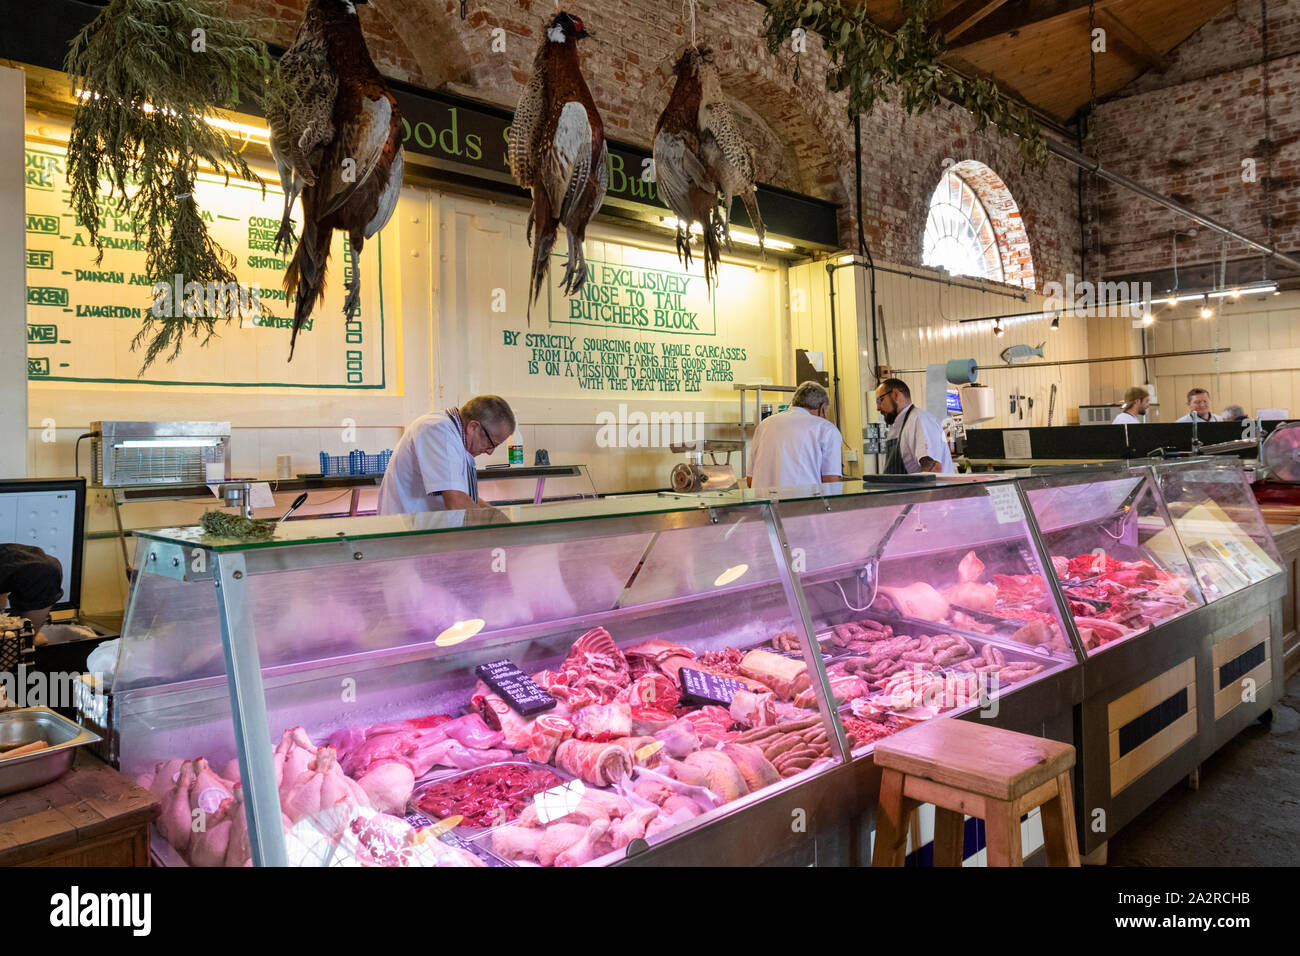 The goods shed, Butchers, pheasants hanging from ceiling, canterbury, kent, uk Stock Photo